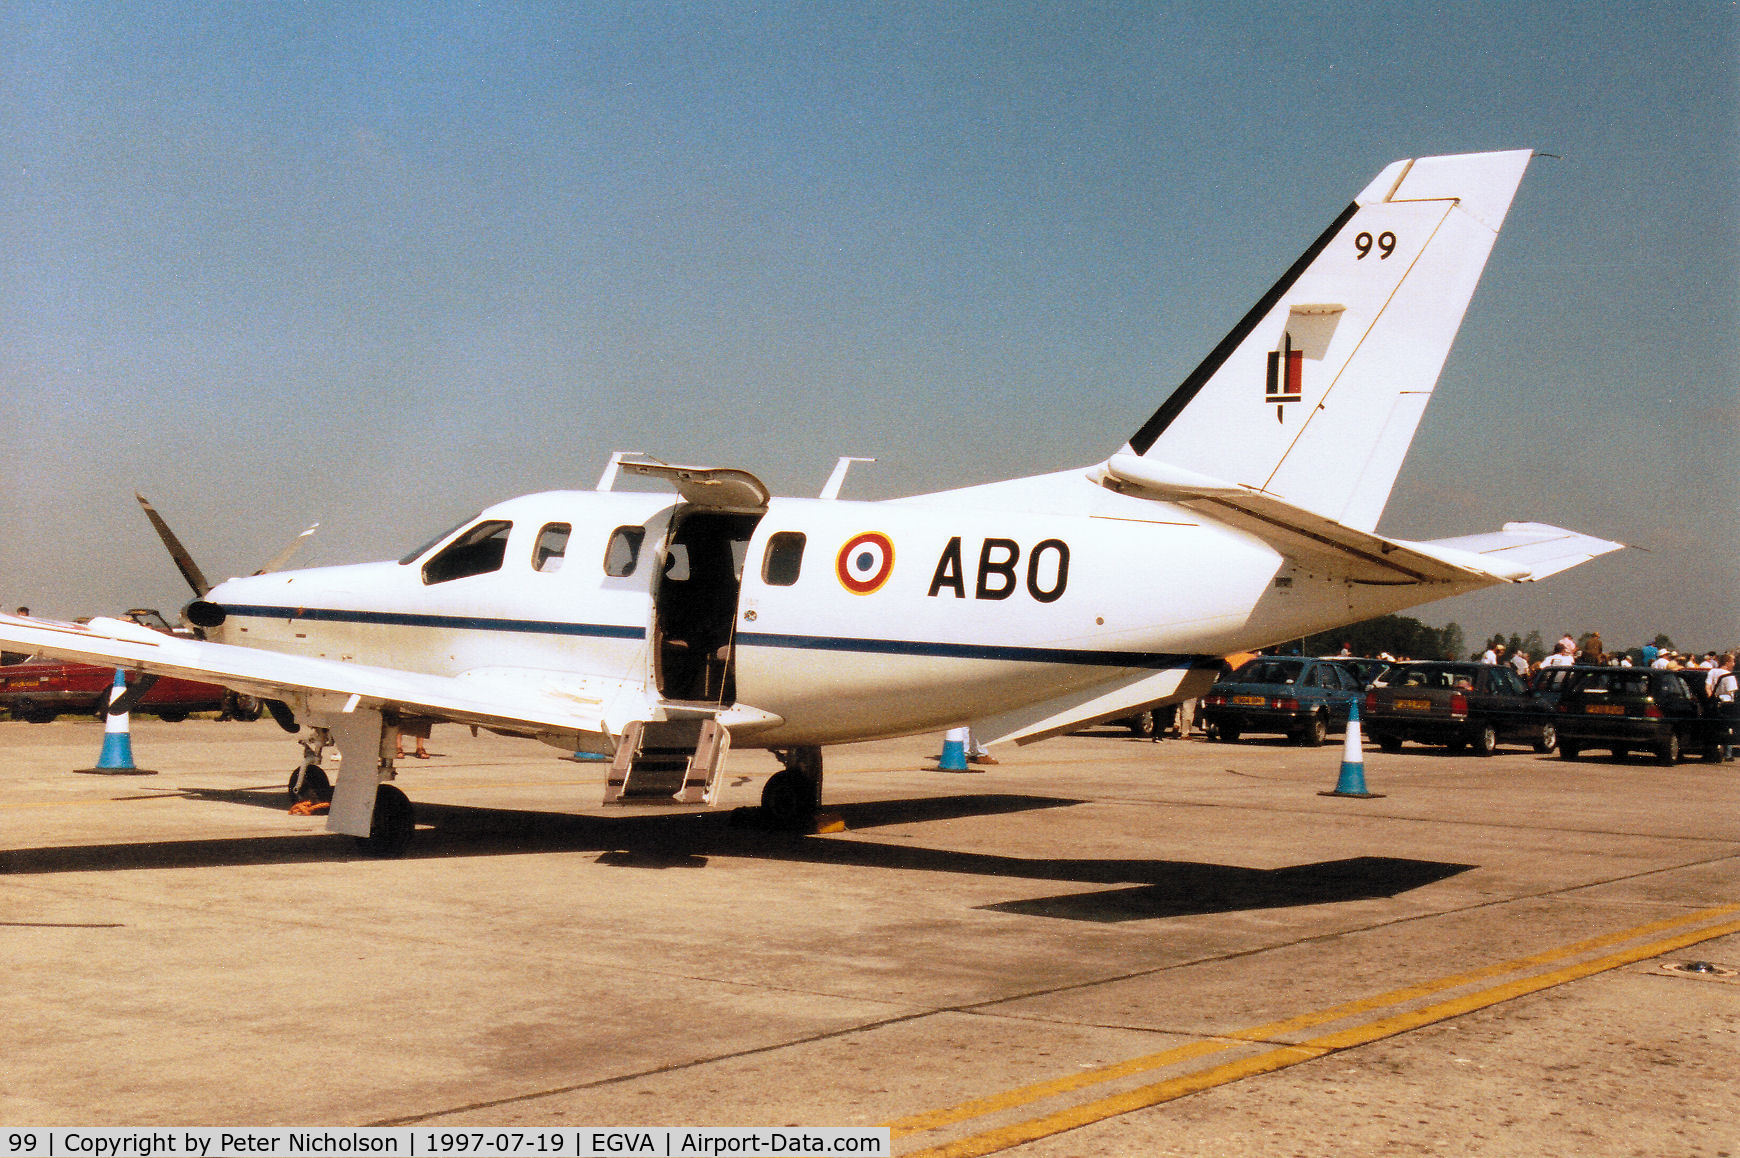 99, 1994 Socata TBM-700 C/N 99, French Army TBM-700, callsign FMY 8022, of 3 GHL on display at the 1997 Intnl Air Tattoo at RAF Fairford.